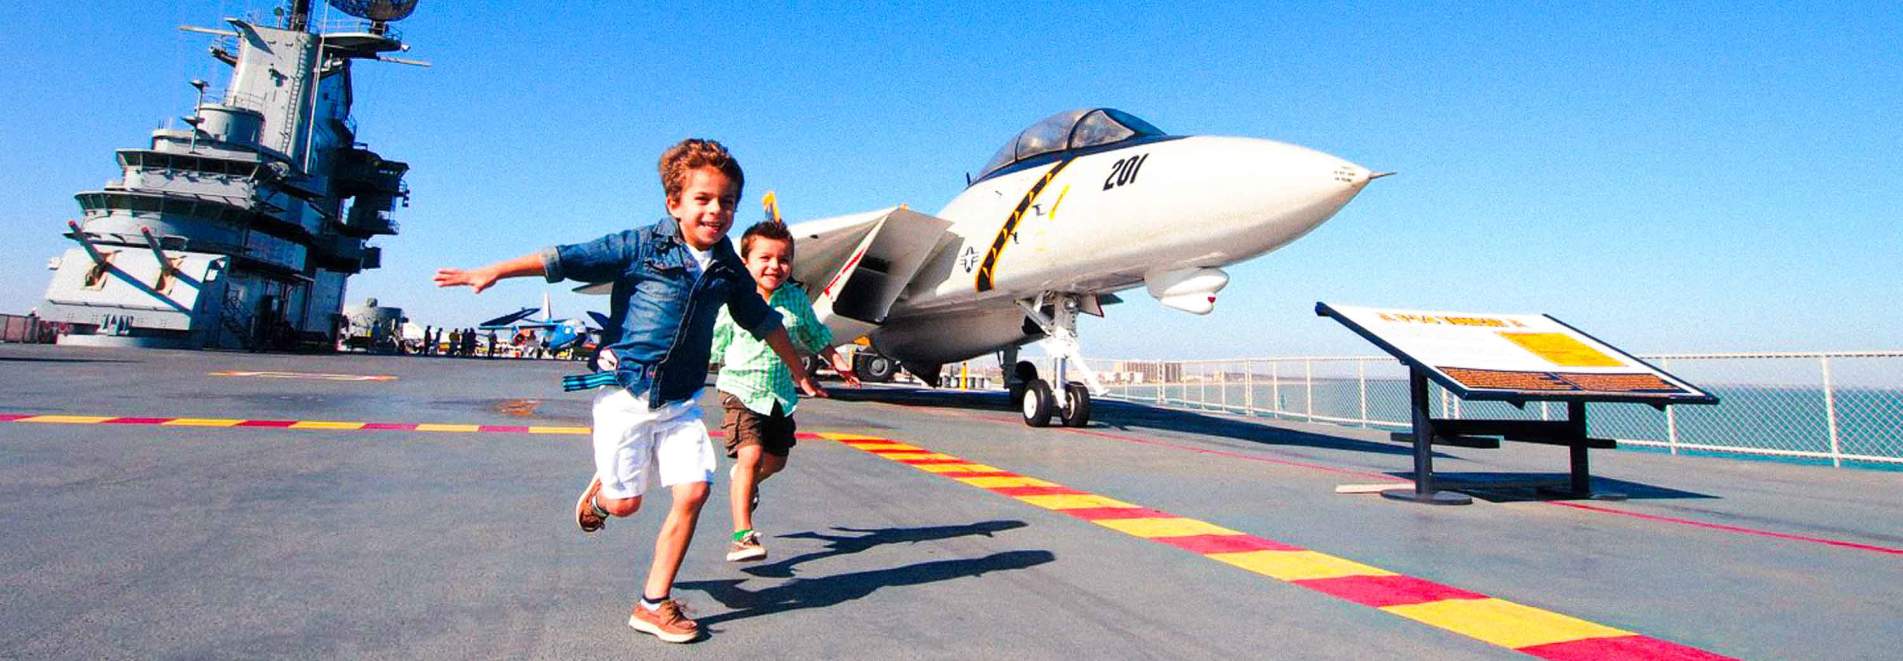 Kids running on aircraft carrier Lifestyle Photography from K2 Productions